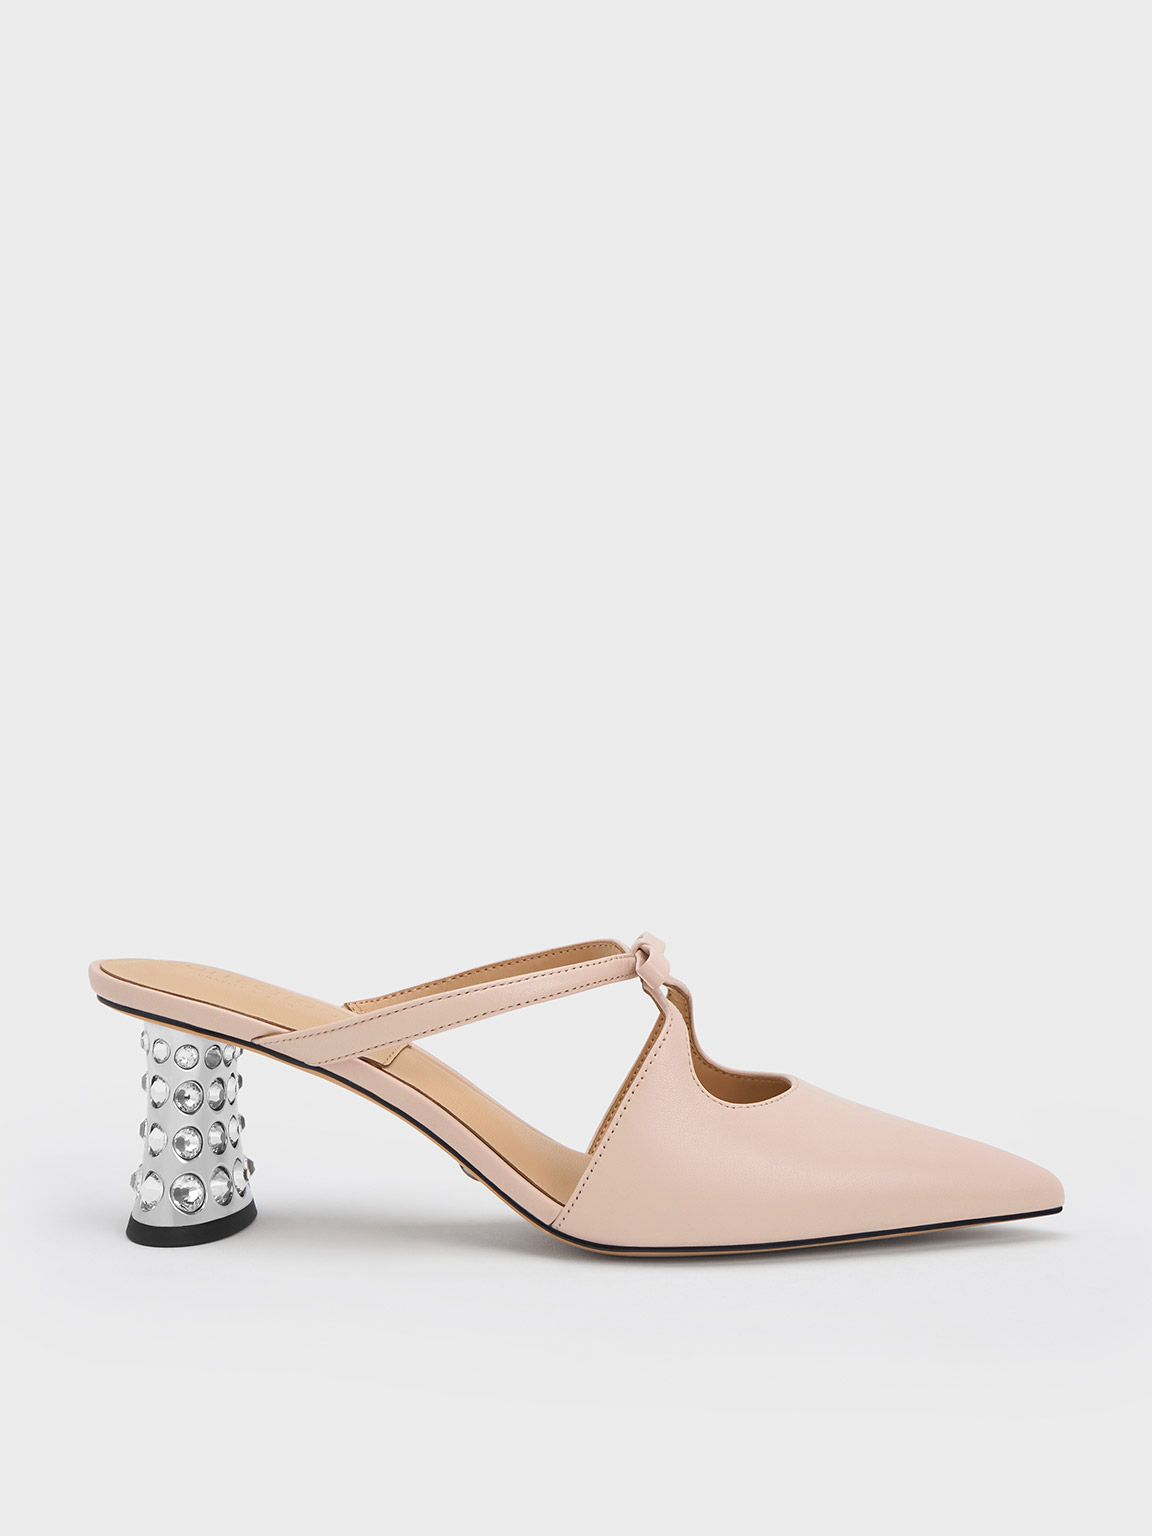 Nude Bow Crossover Gem-Embellished Mules - CHARLES & KEITH SG